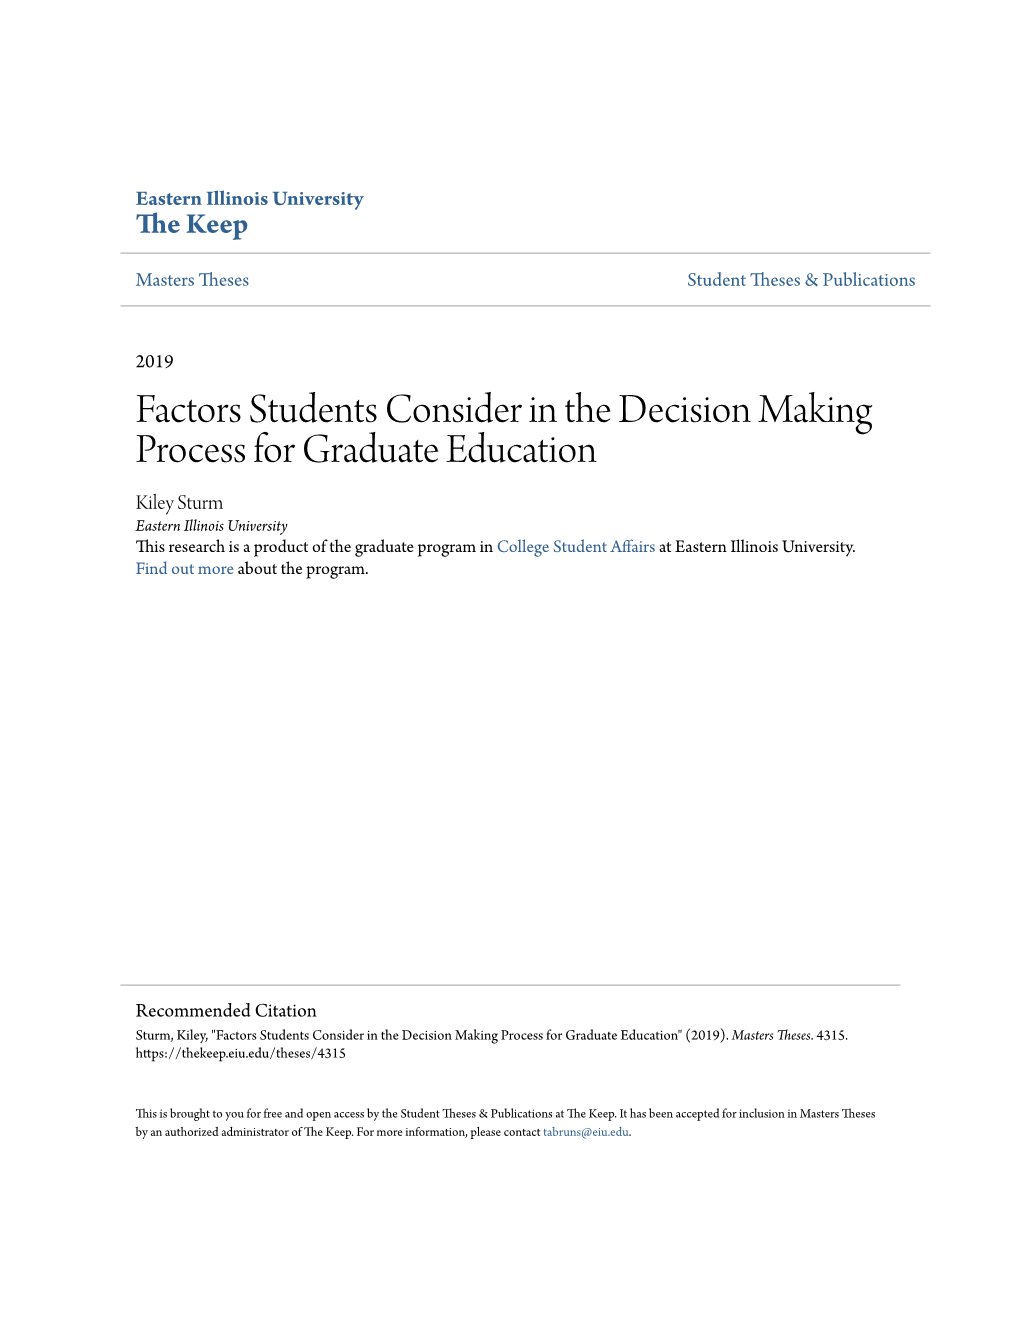 Factors Students Consider in the Decision Making Process For